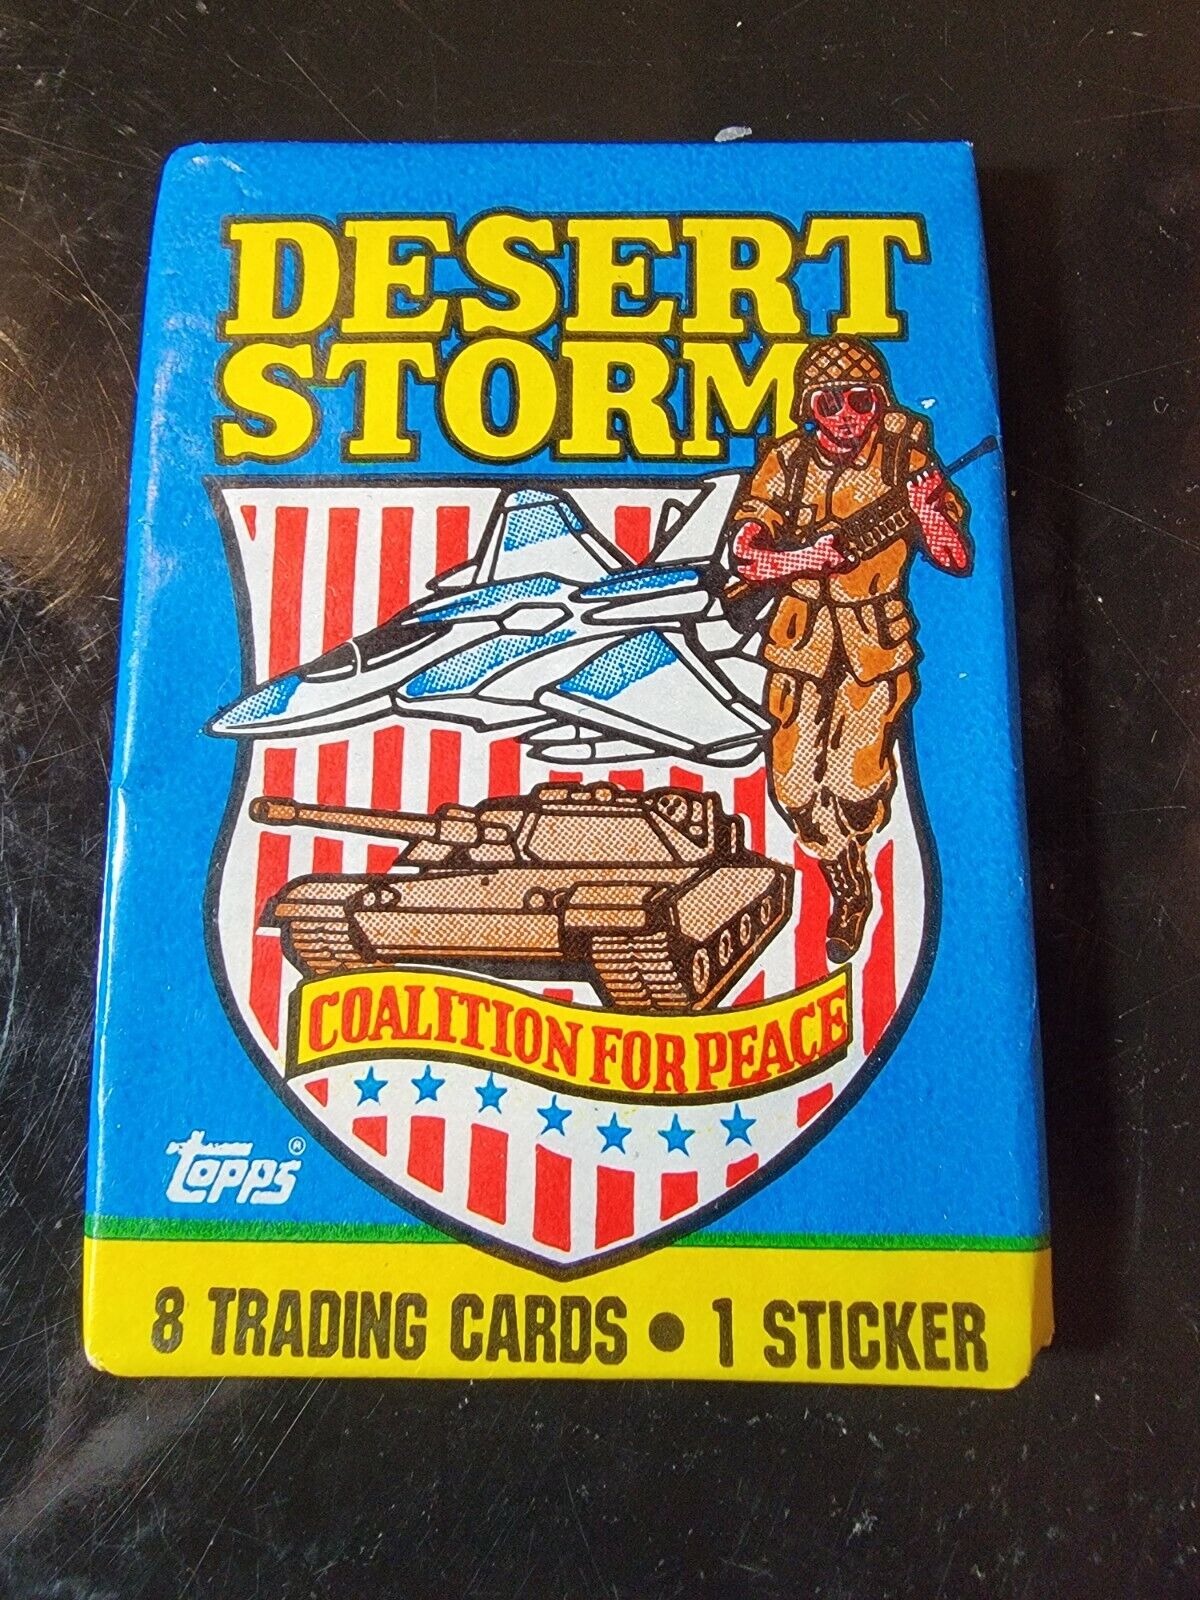 Desert Storm Series 1 Coalition for Peace Topps 1991 Wax PACK 8 Cards 1 Sticker